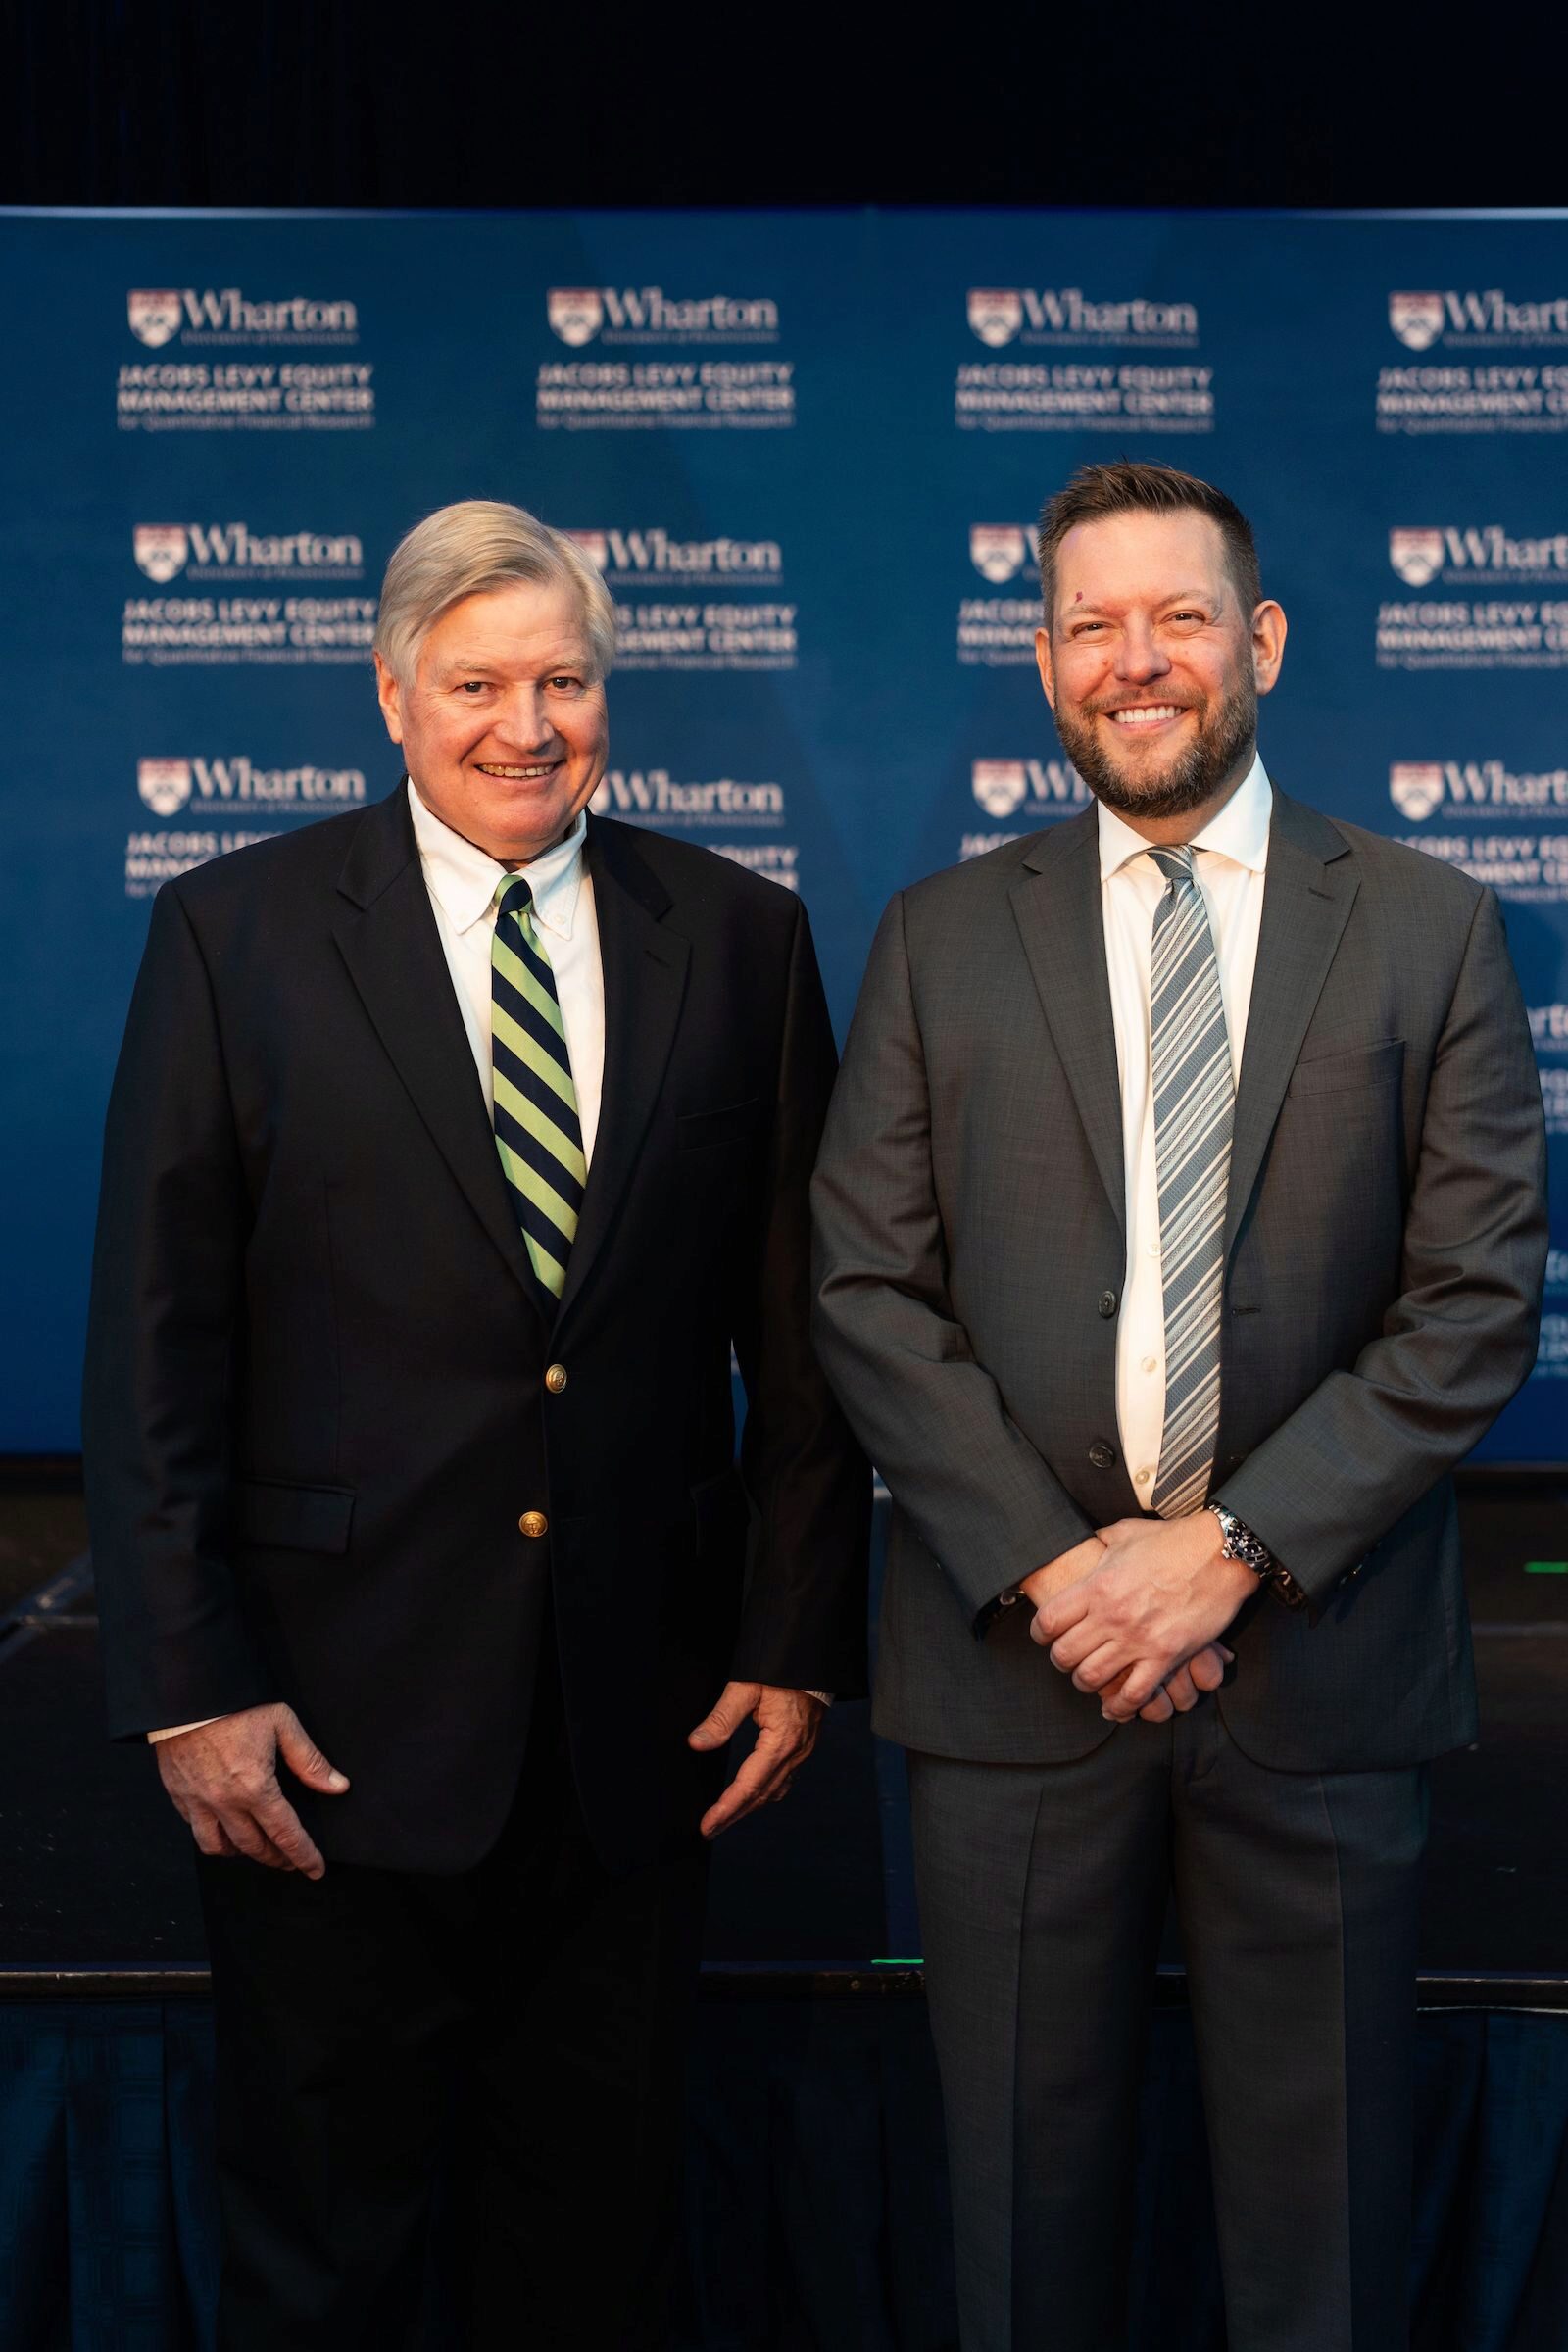 Craig MacKinlay and Christopher Geczy smiling before a blue Wharton background